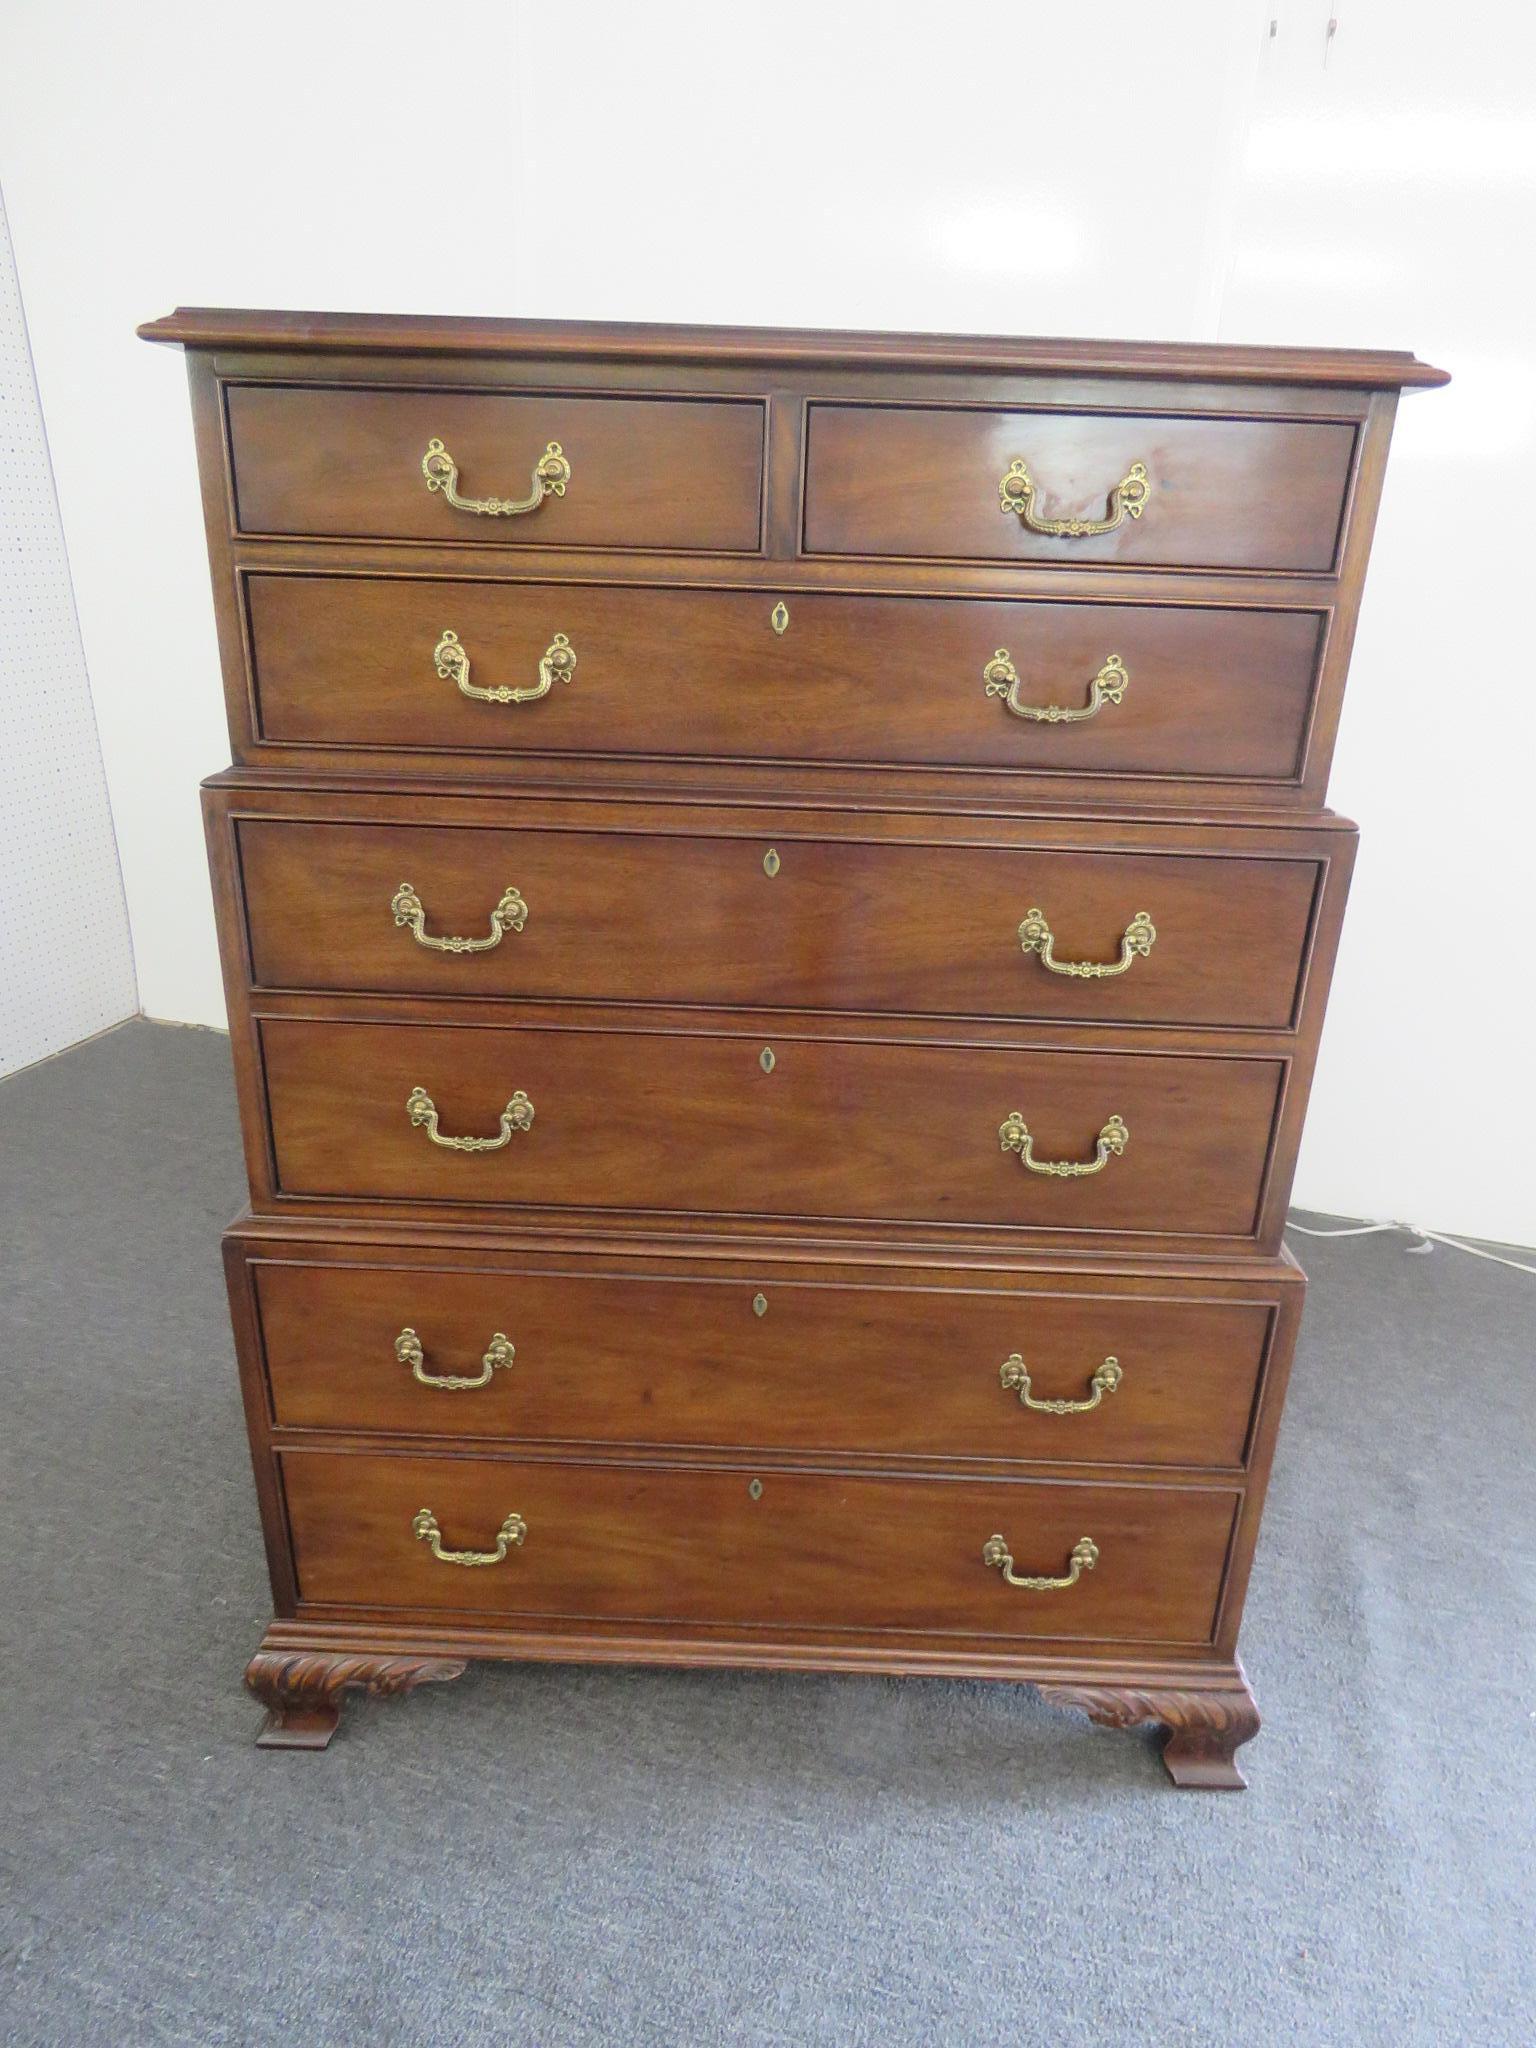 English traditional seven-drawer high chest with faux key holes.